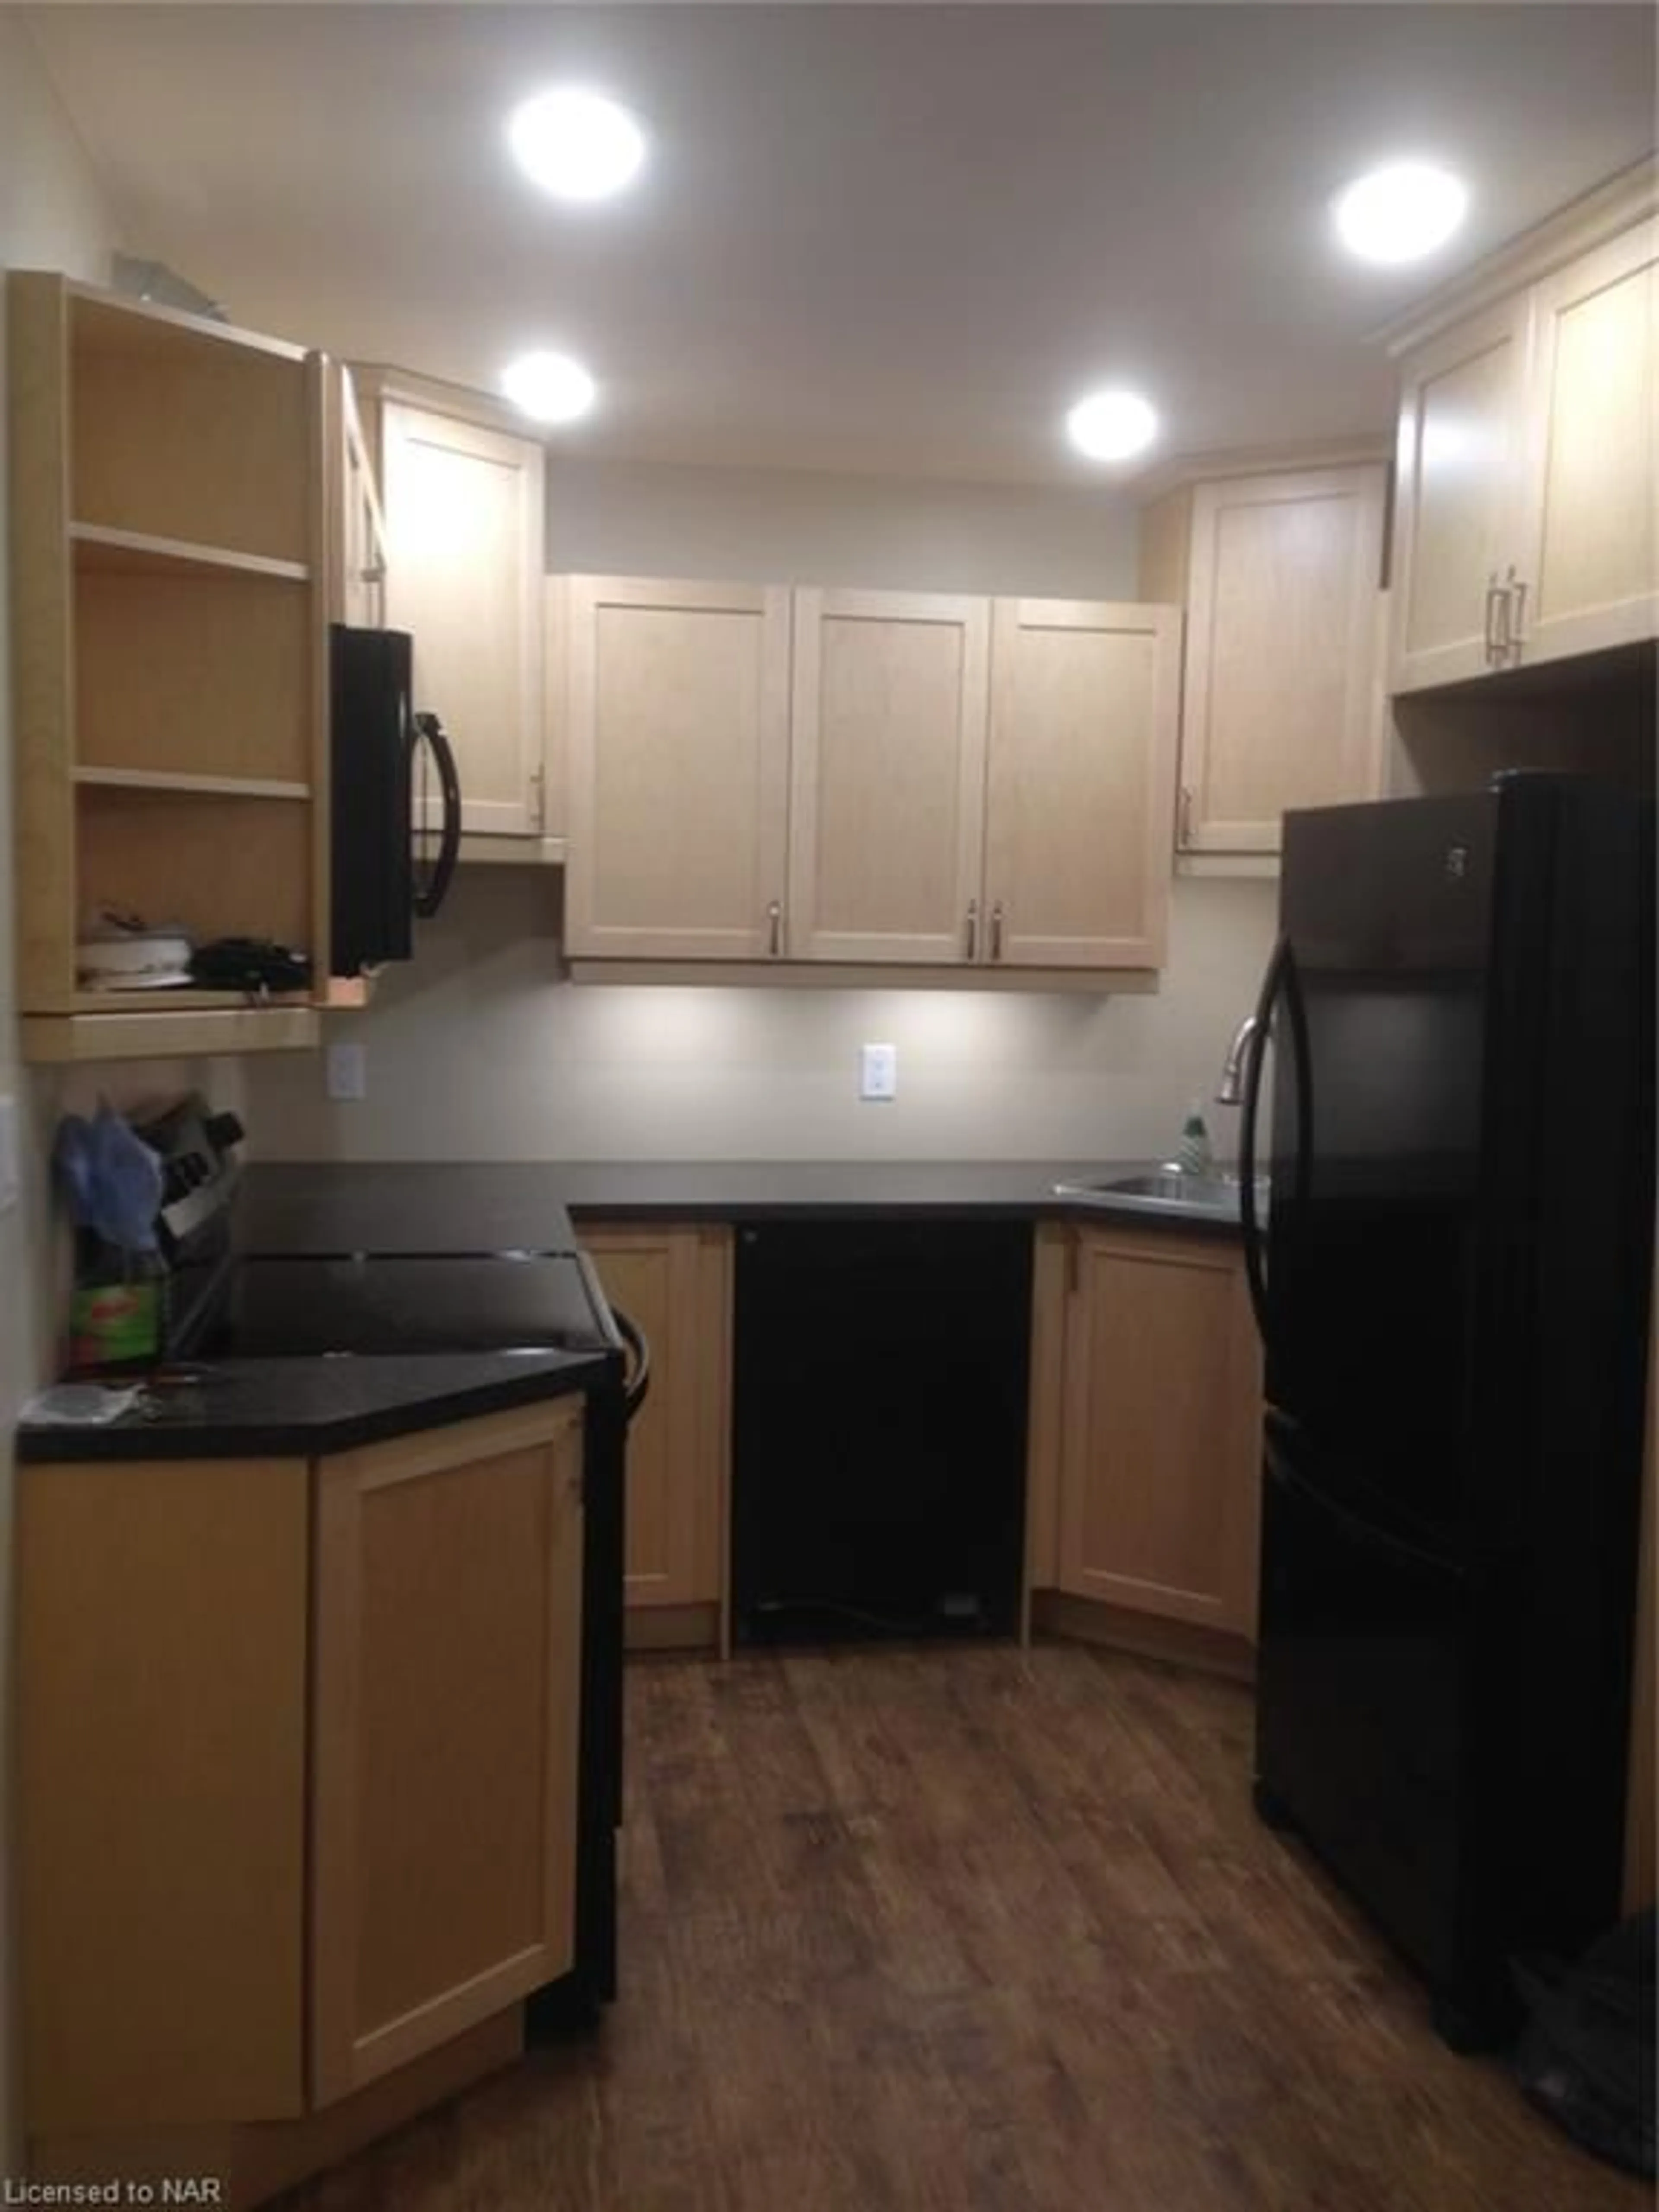 Standard kitchen for 32 Dianne Dr, St. Catharines Ontario L2P 3R7